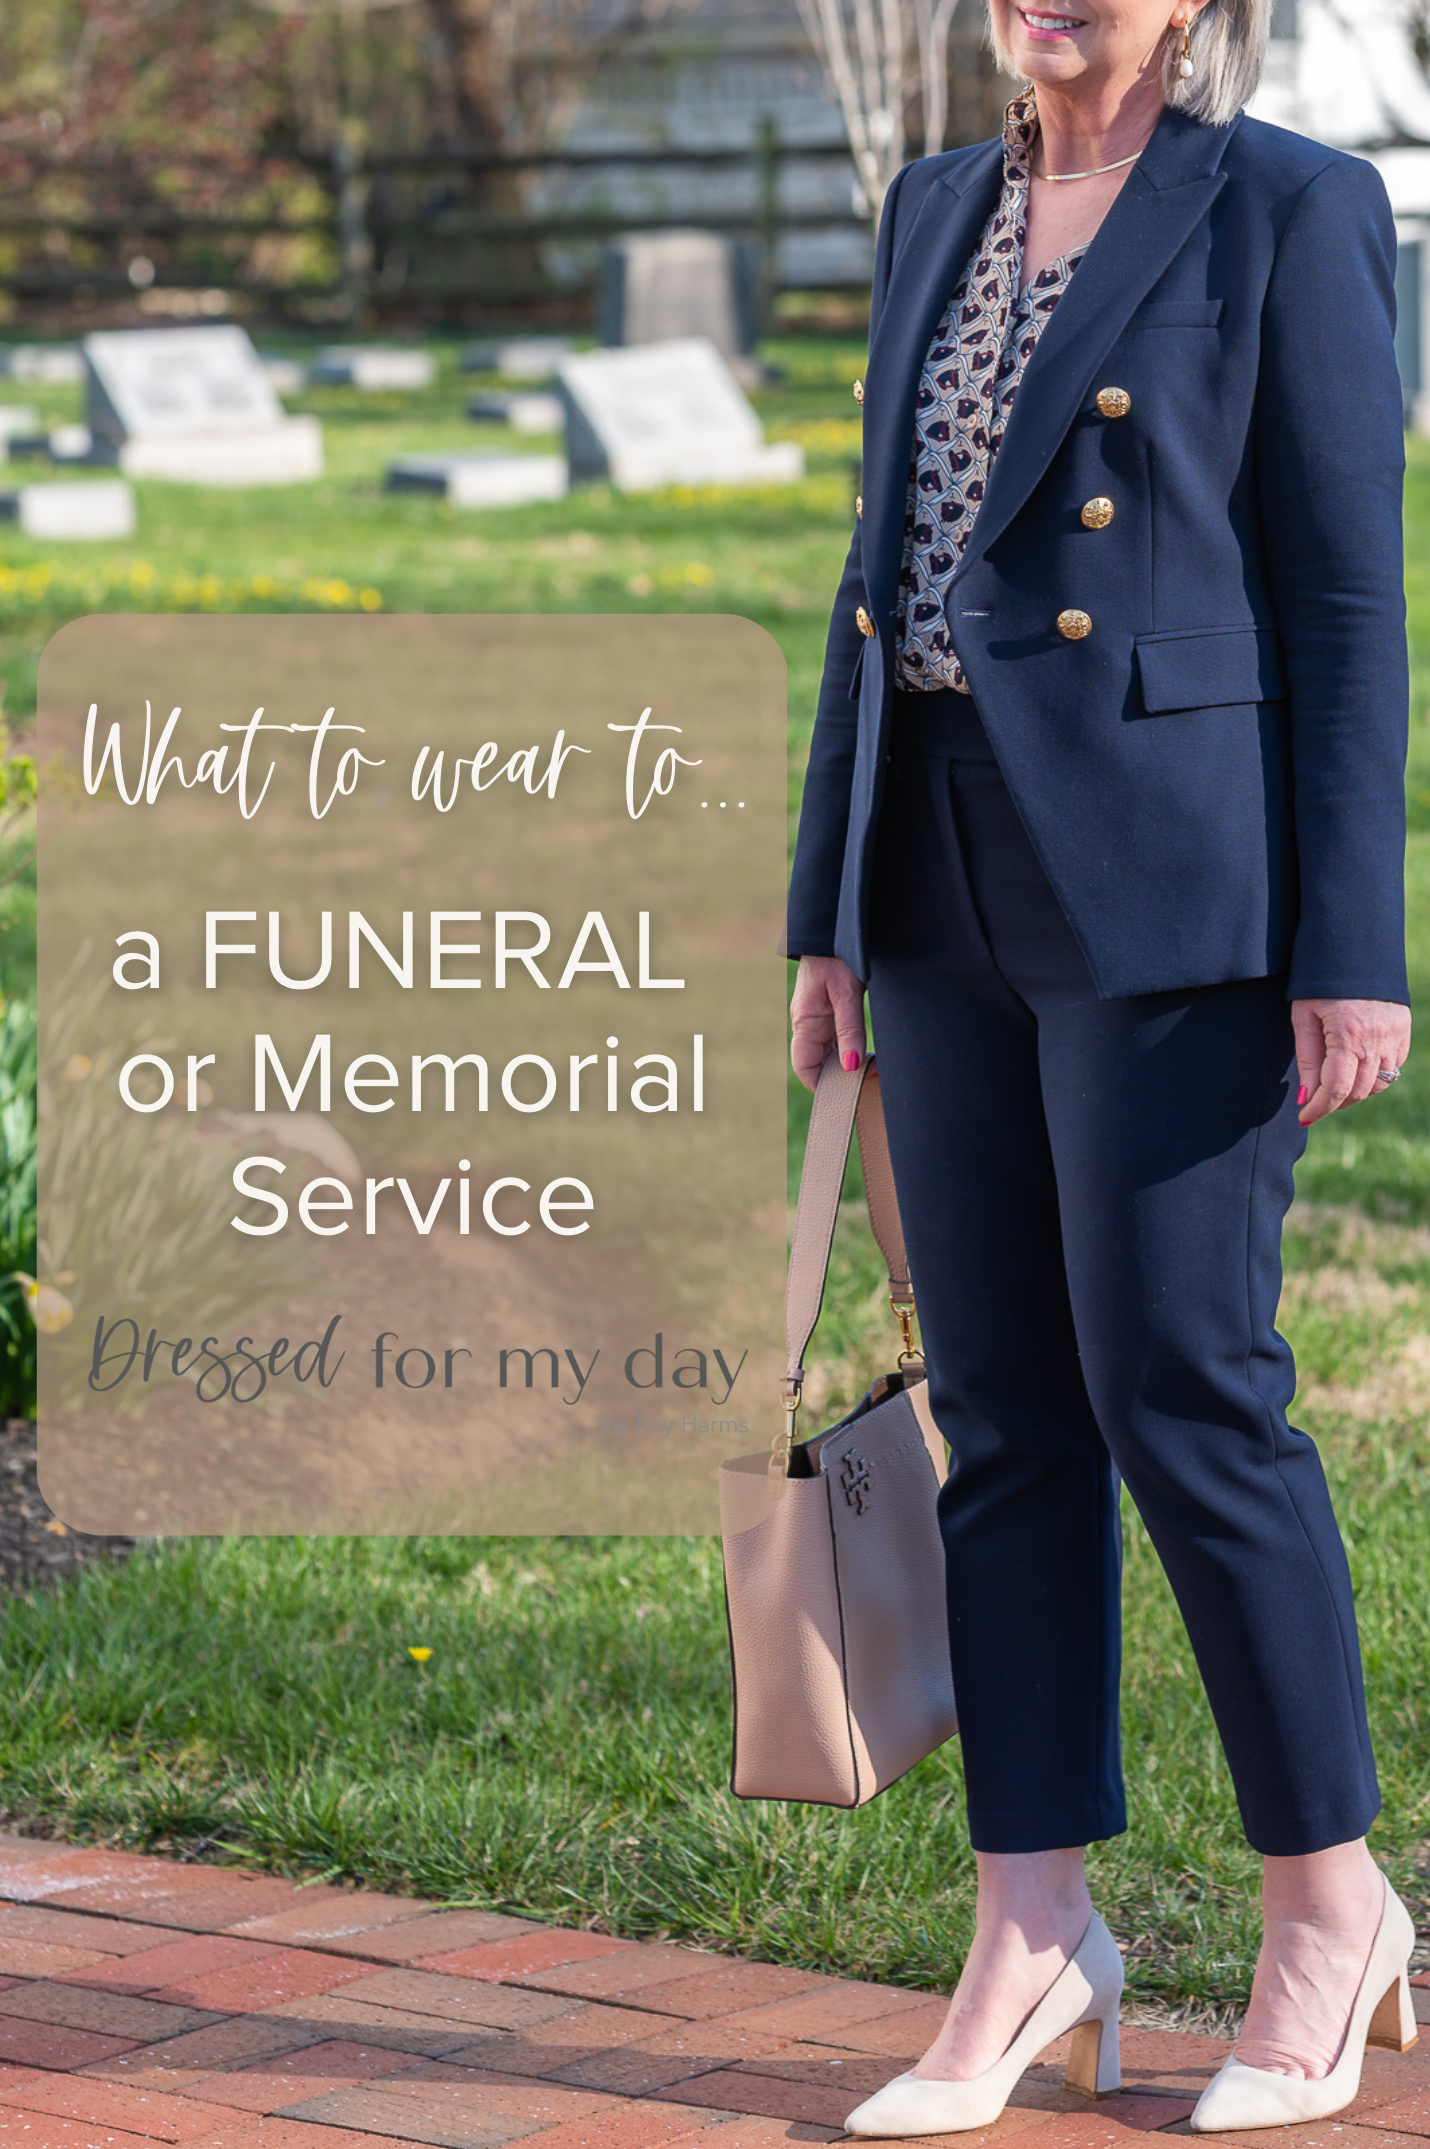 What to wear to a Funeral or Memorial Service